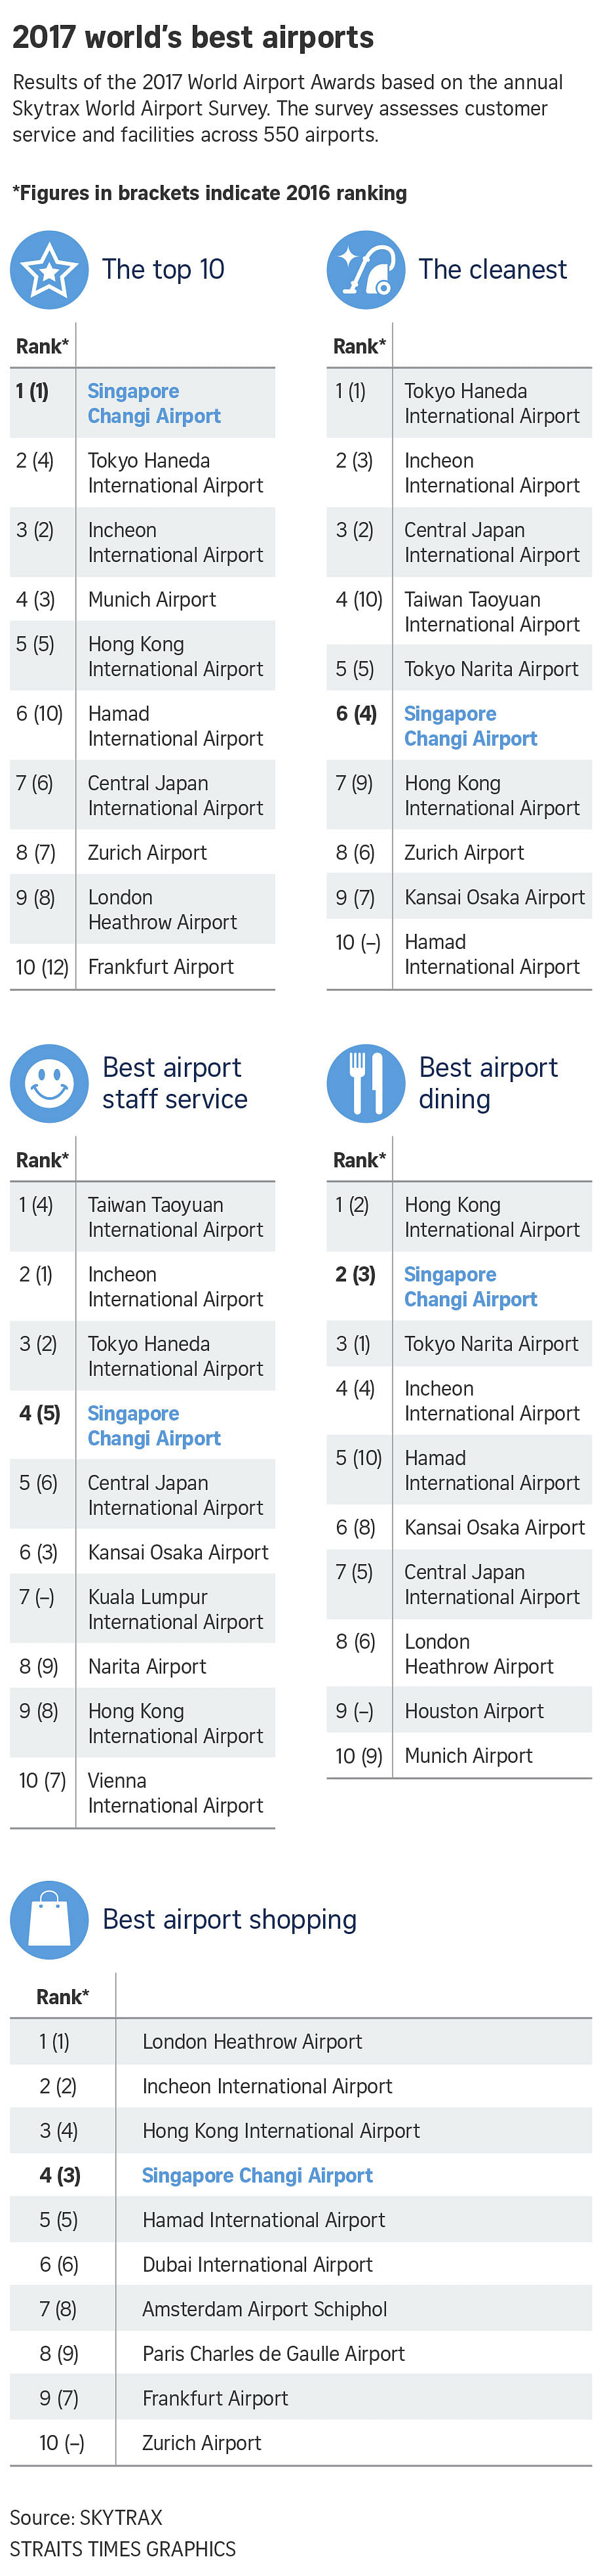 Changi Airport regains crown, named world's best airport for 12th time : r/ singapore